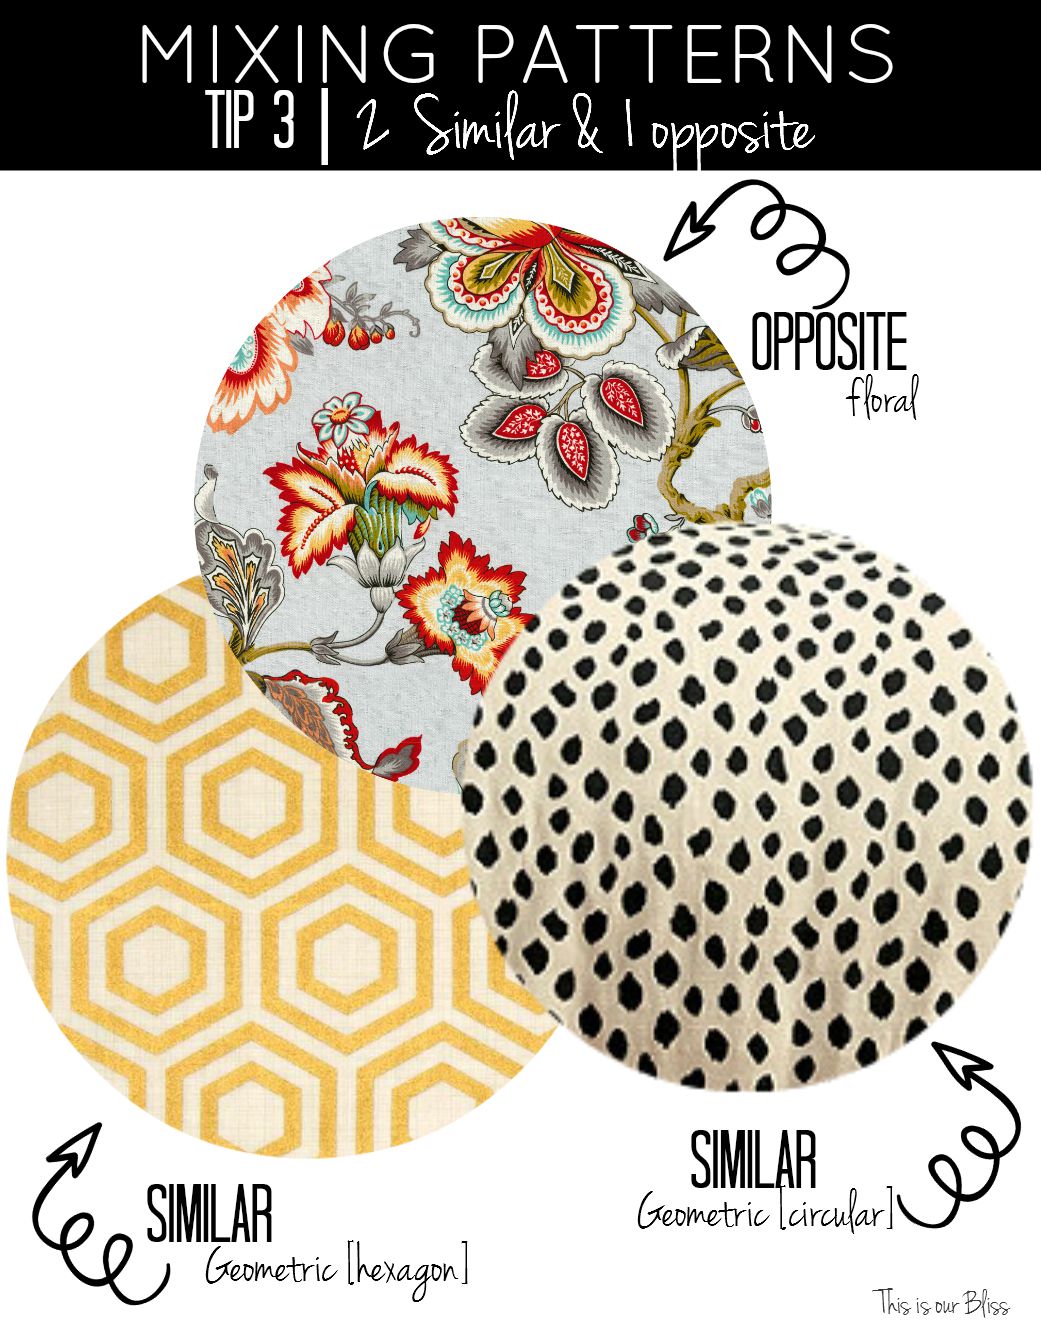 How to mix patterns - mixing patterns - tip 3 - similar and opposite - geometric vs floral - This is our Bliss